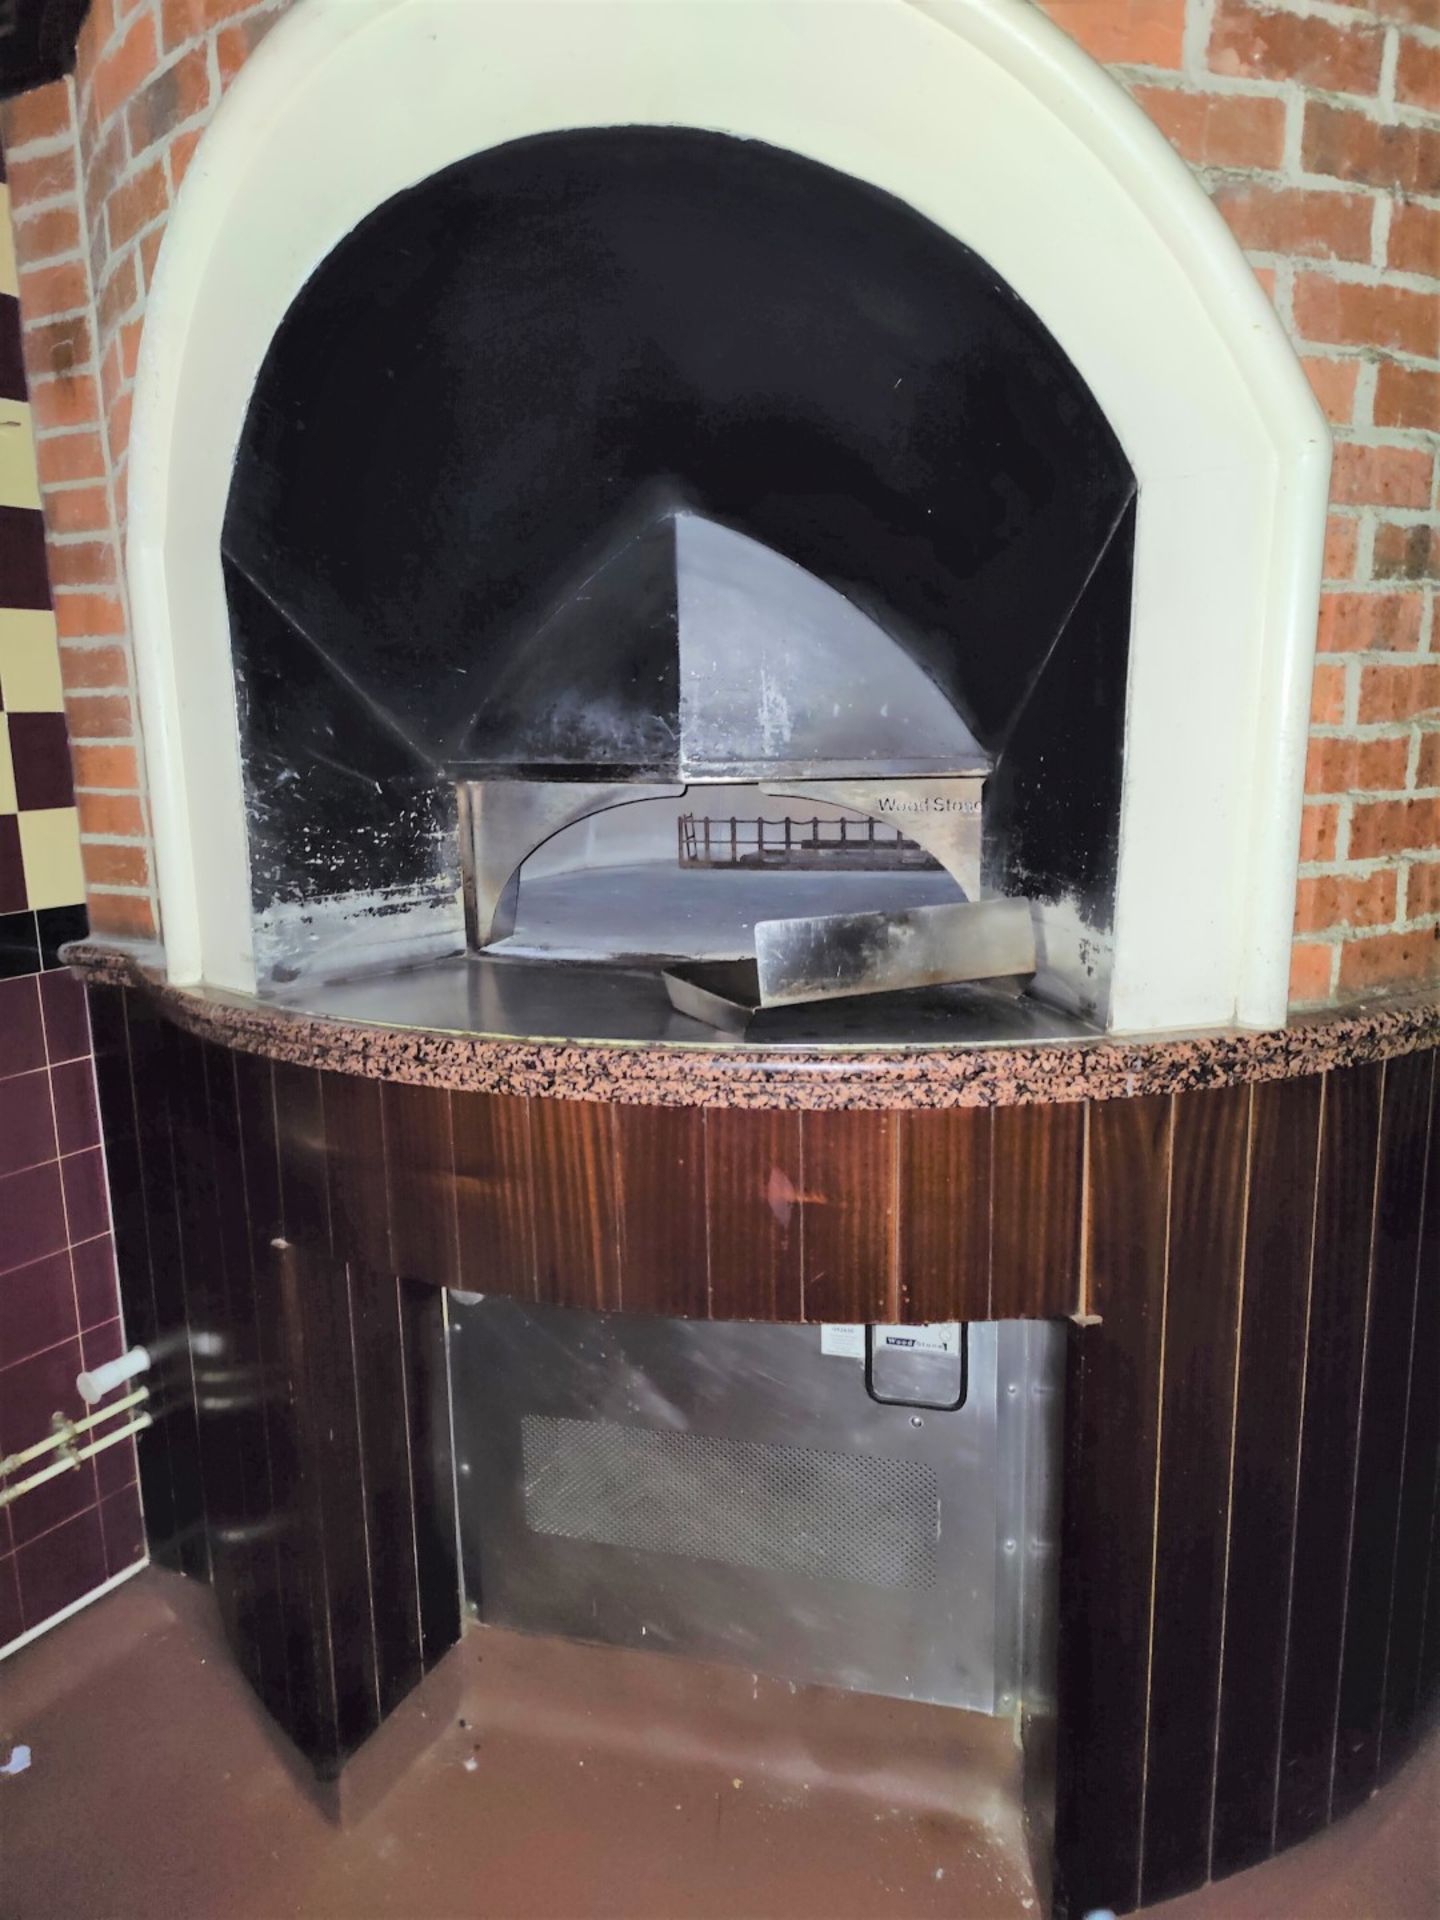 1 x Woodstone Mountain Series Commercial Gas Fired Pizza Oven - Approx RRP £25,000 - Image 2 of 9